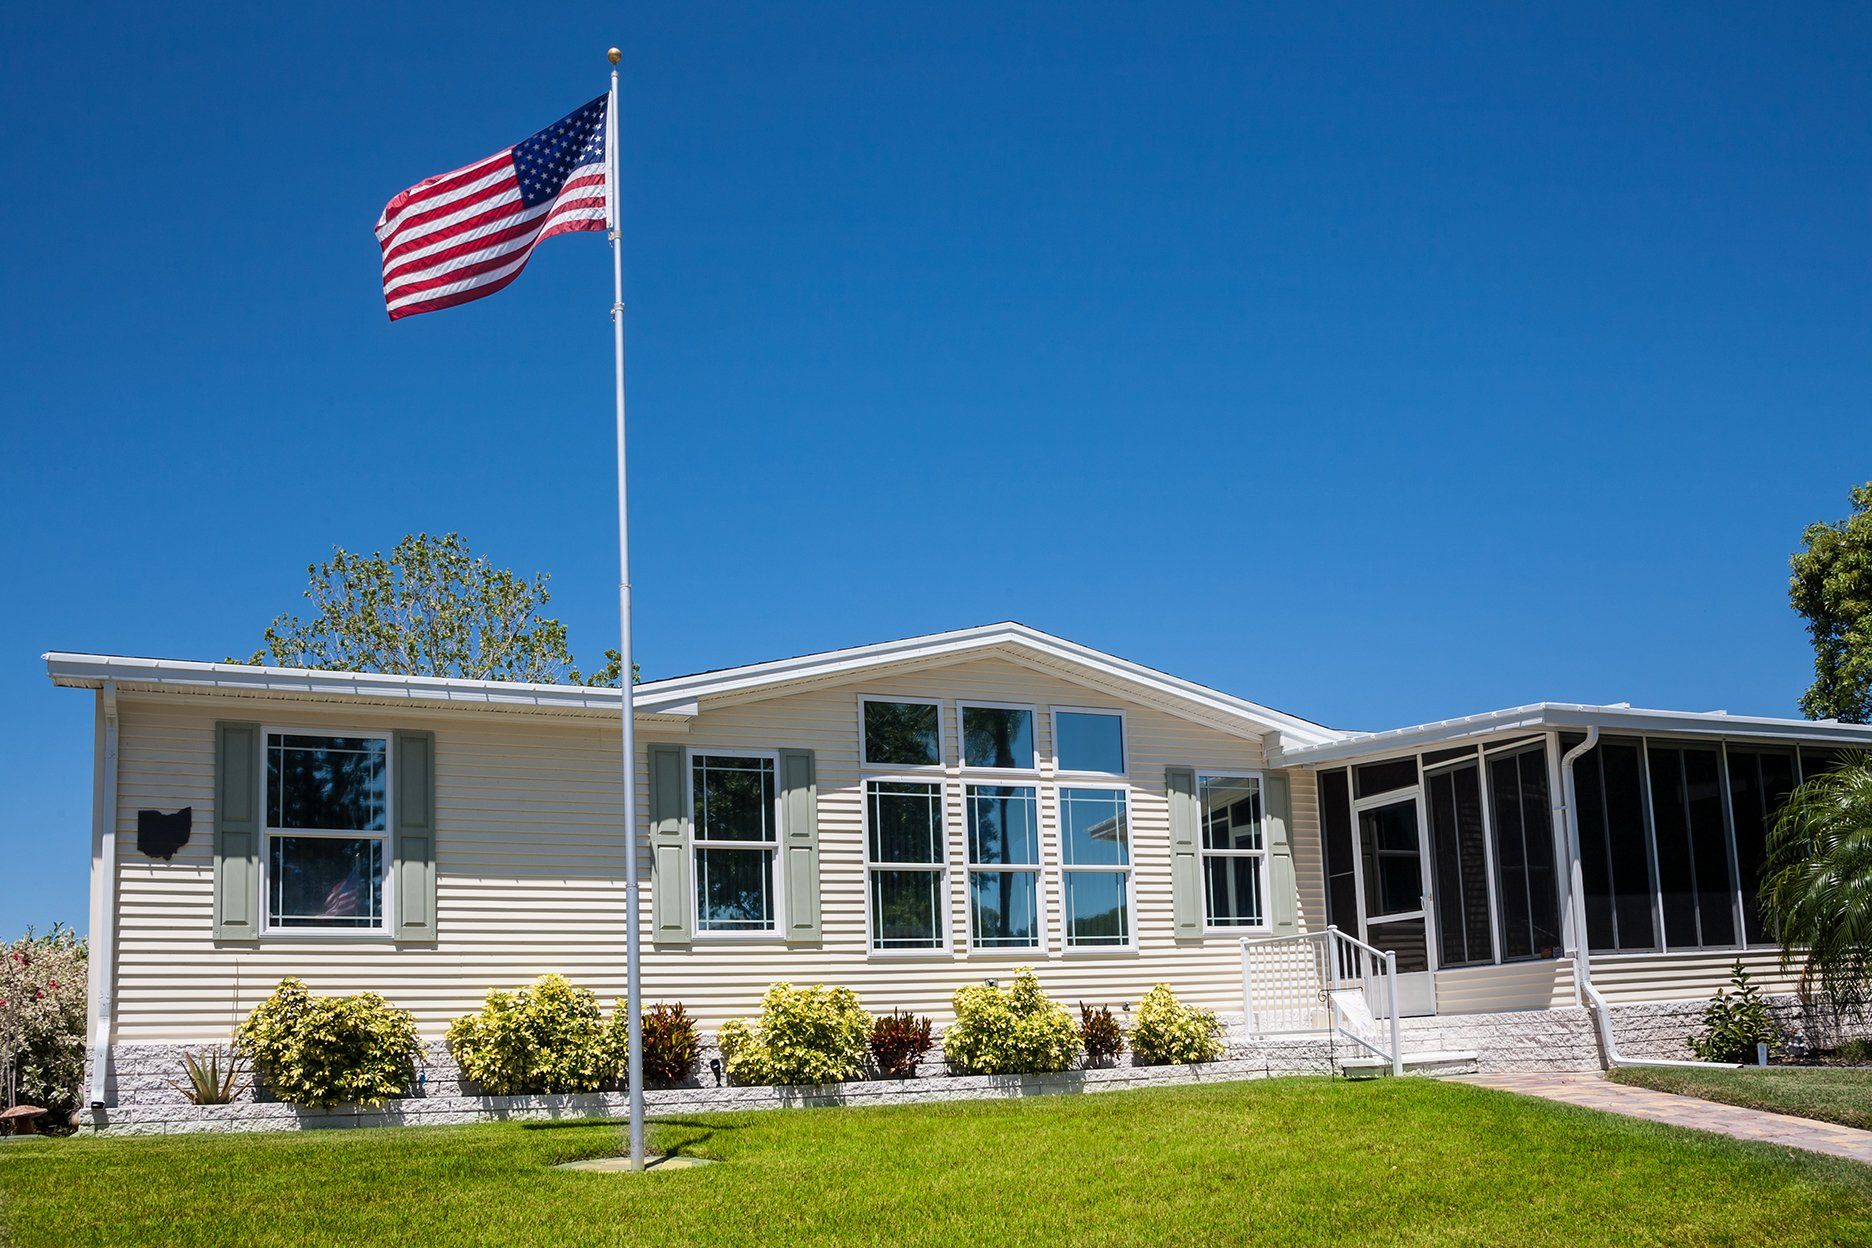 What To Look For When Buying A New Manufactured Home?